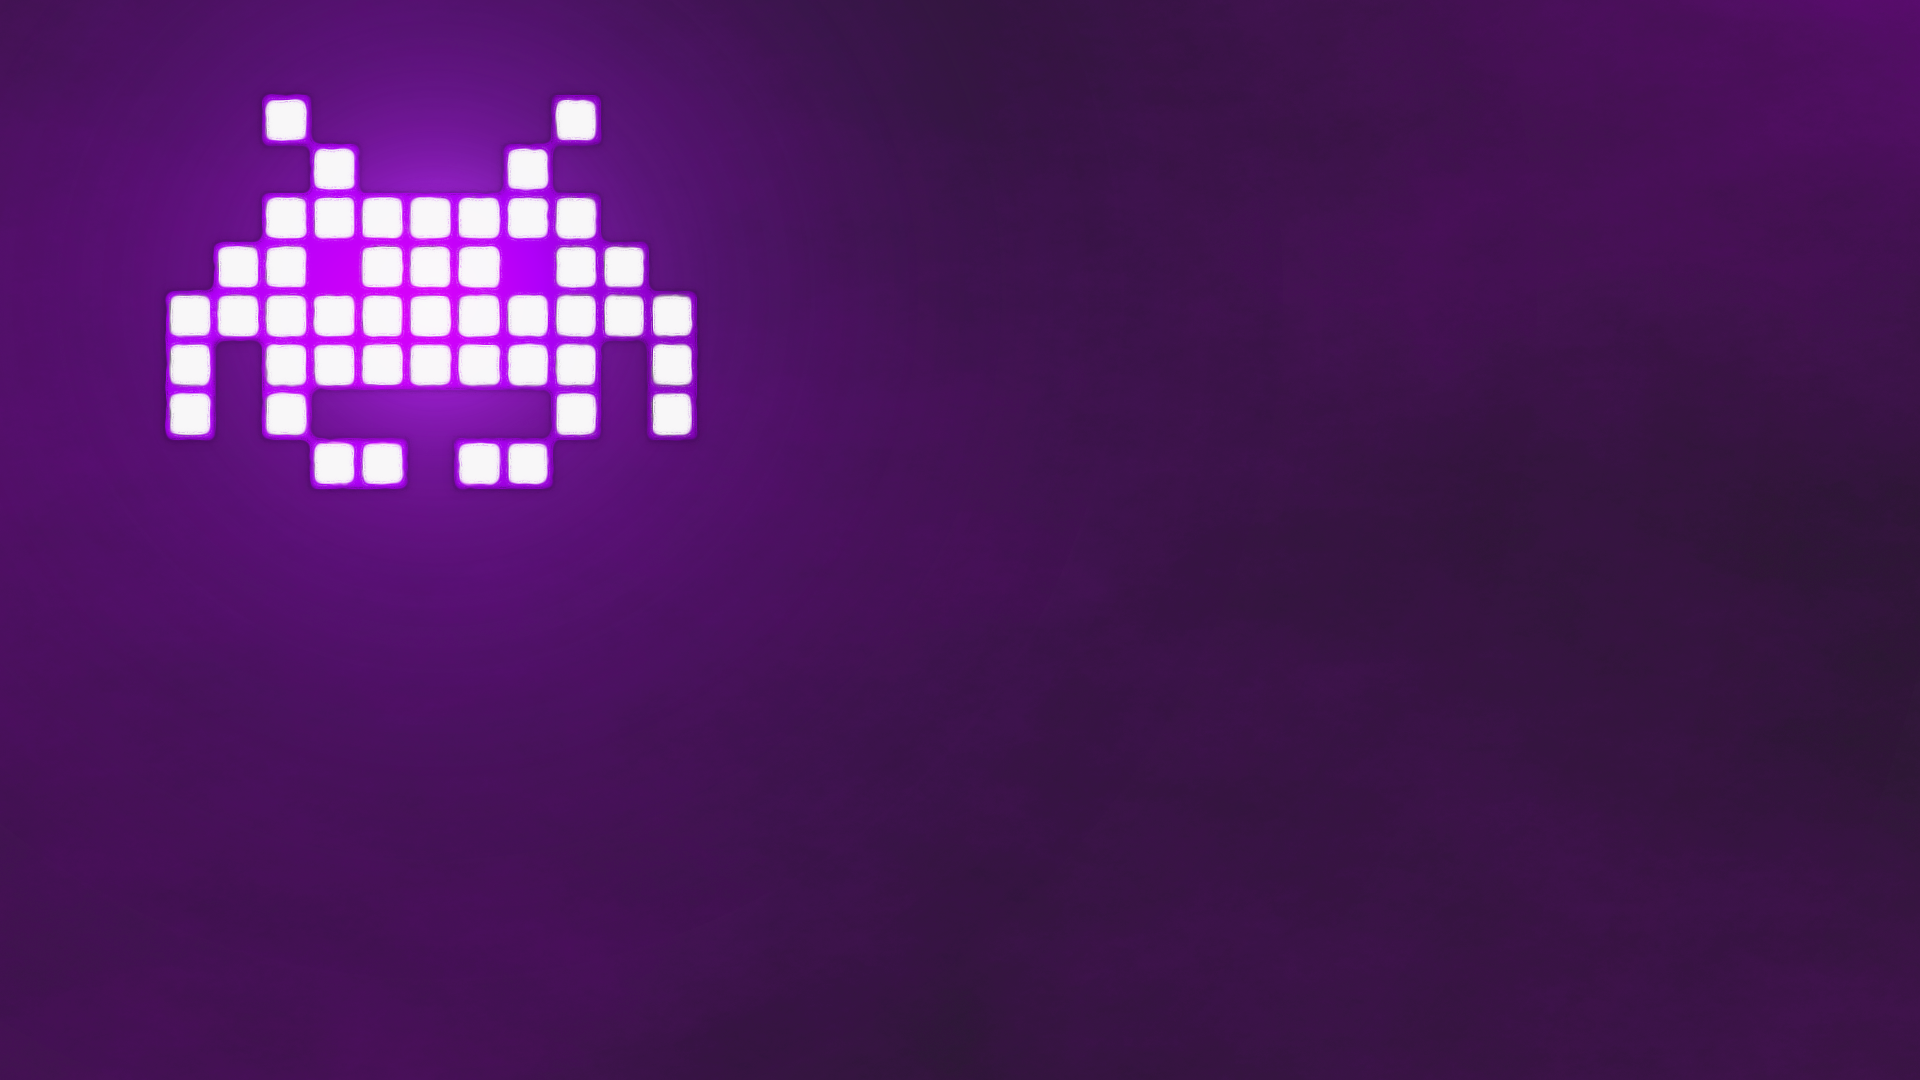 Download - Space Invaders , HD Wallpaper & Backgrounds